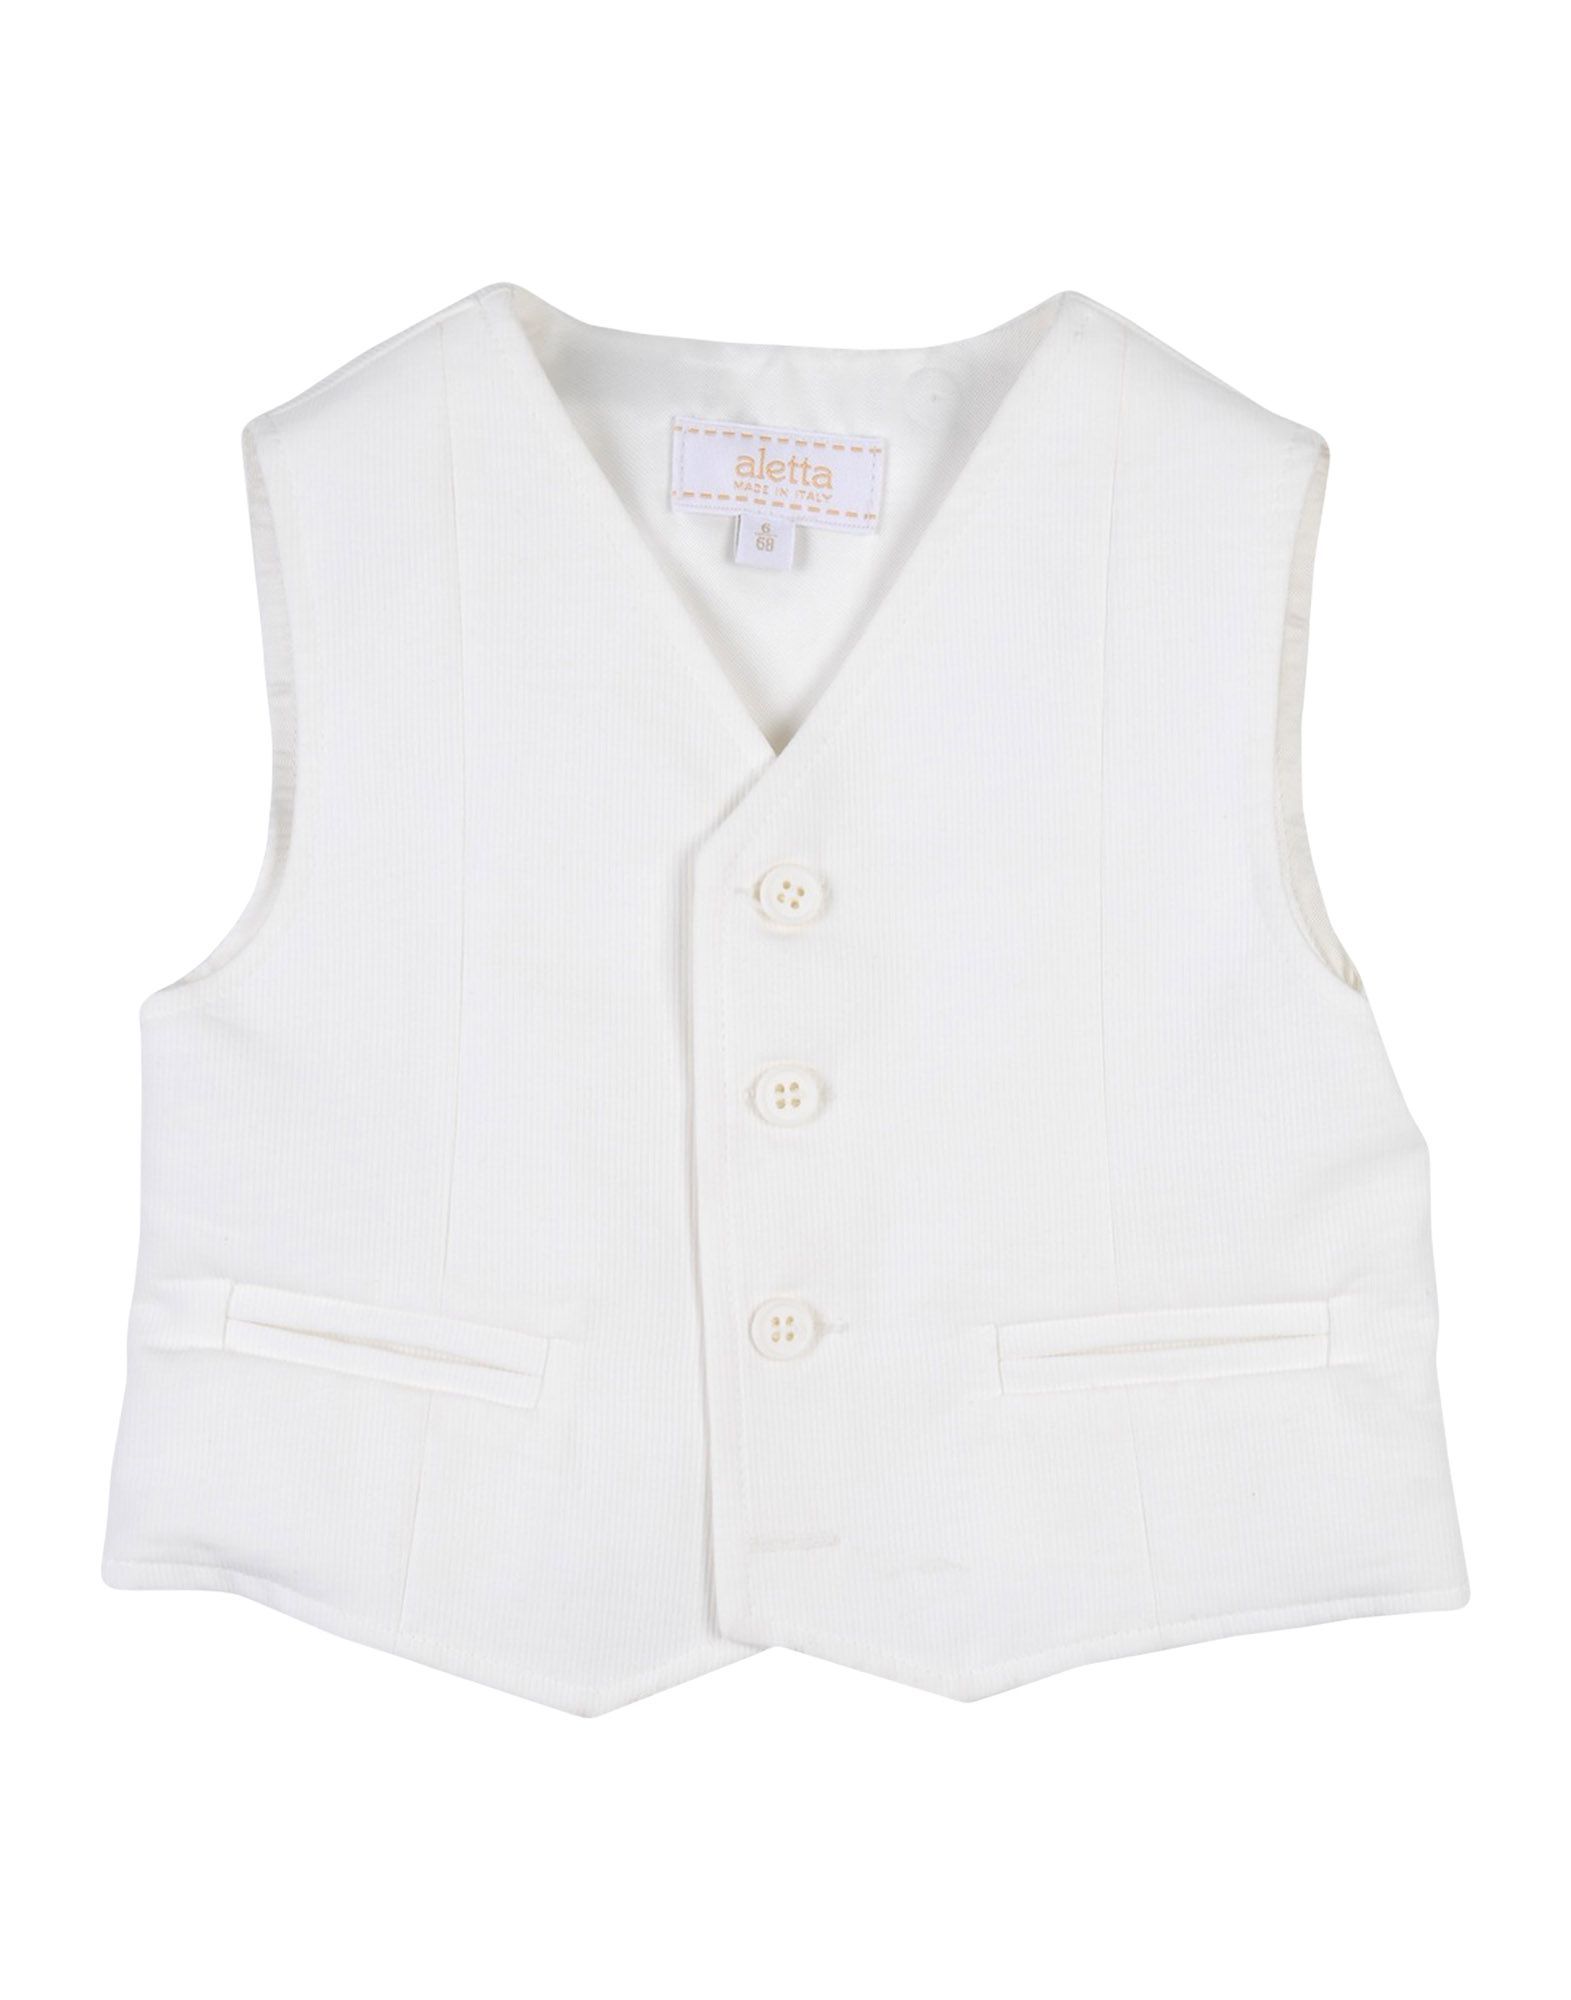 plain weave, no appliqu�s, basic solid colour, multipockets, 3 buttons, v-neck, single-breasted , sleeveless, fully lined, do not wash, dry cleanable, iron at 110� c max, do not bleach, do not tumble dry, stretch, button closing waistcoat with belt